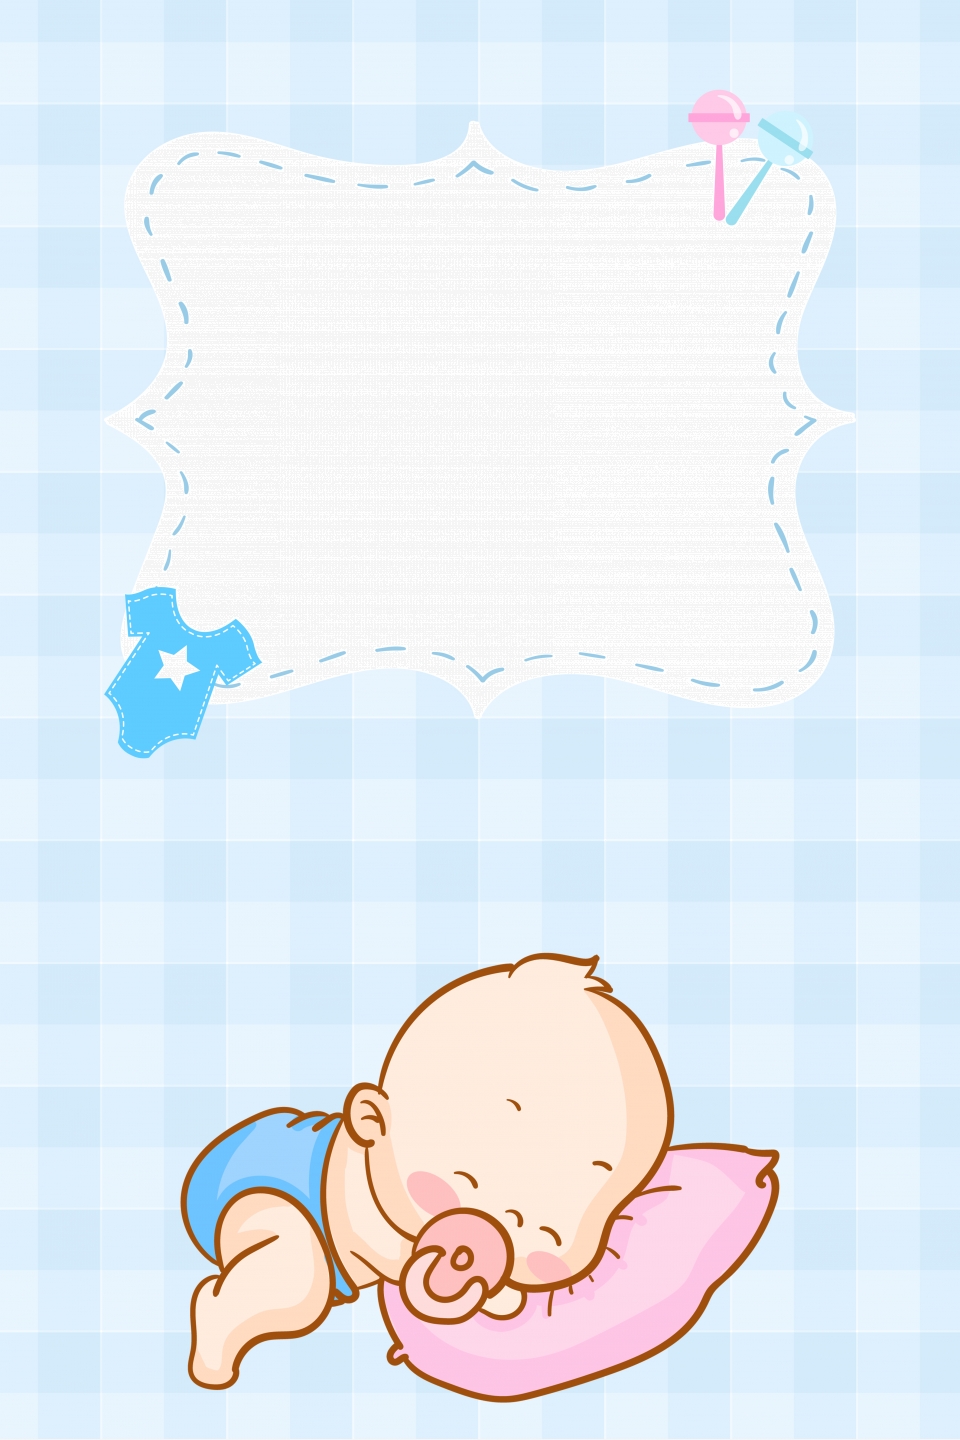 animation newborn baby wallpapers background download, parenting, baby care, drawing